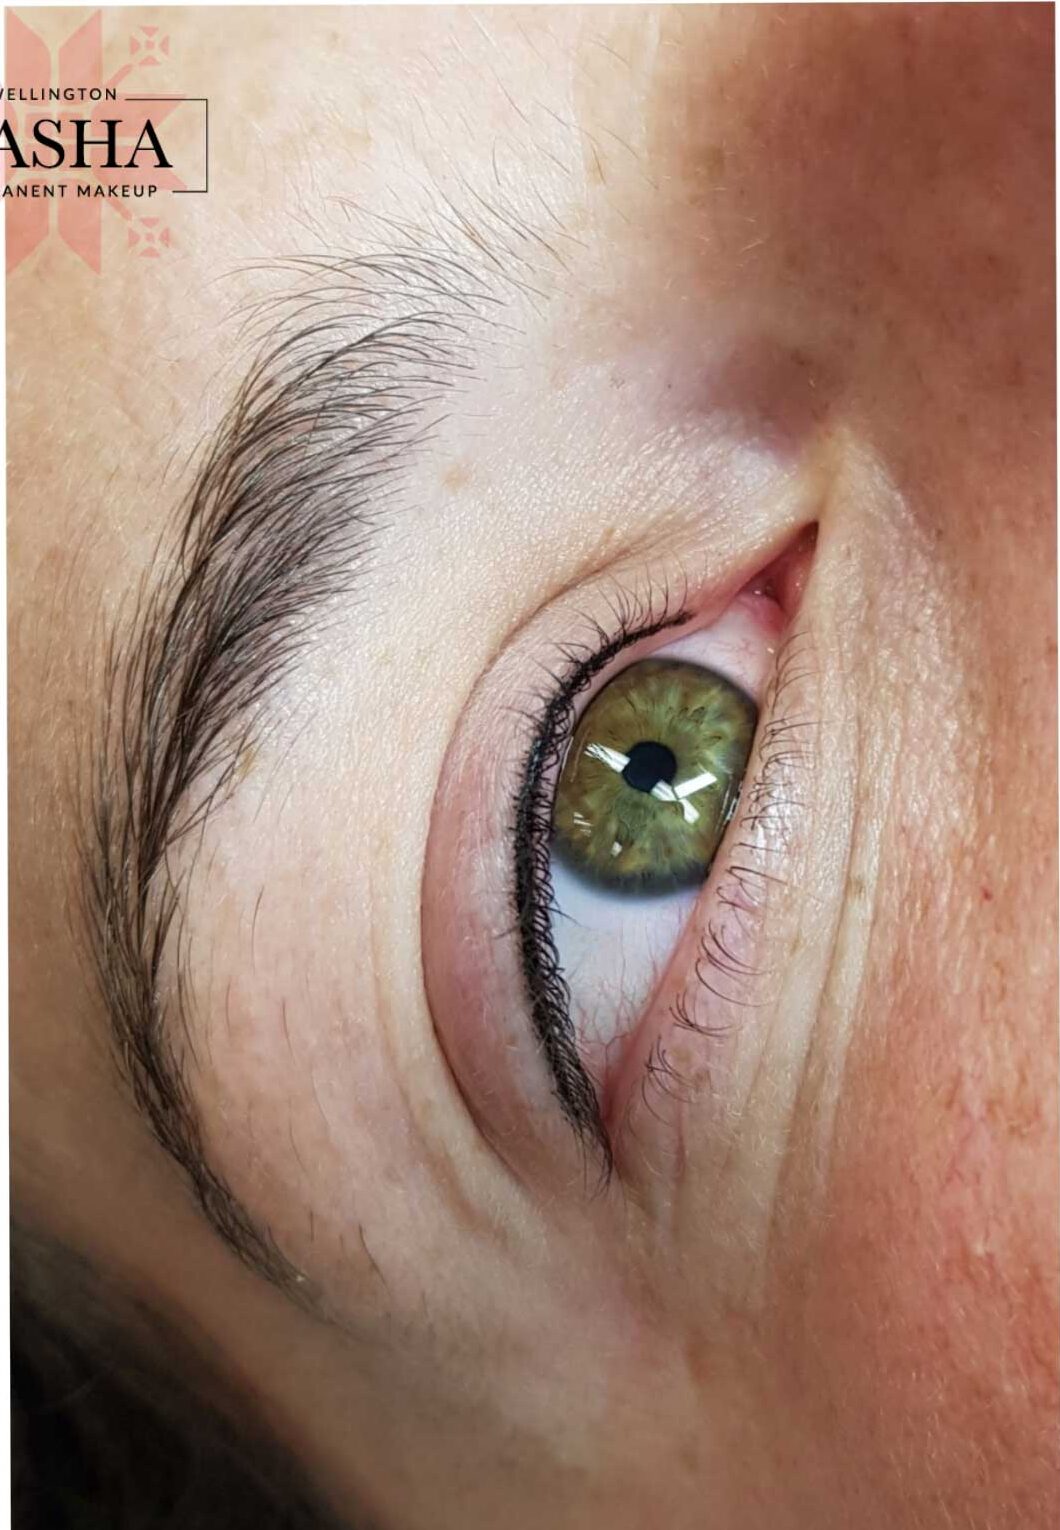 Lash Line Cosmetic Tattoo. Cosmetic and Mediical Tattoo by Dasha. Permanent makeup and reconstructive tattoo, scalp micro-pigmentation in Christchurch, New Zealand